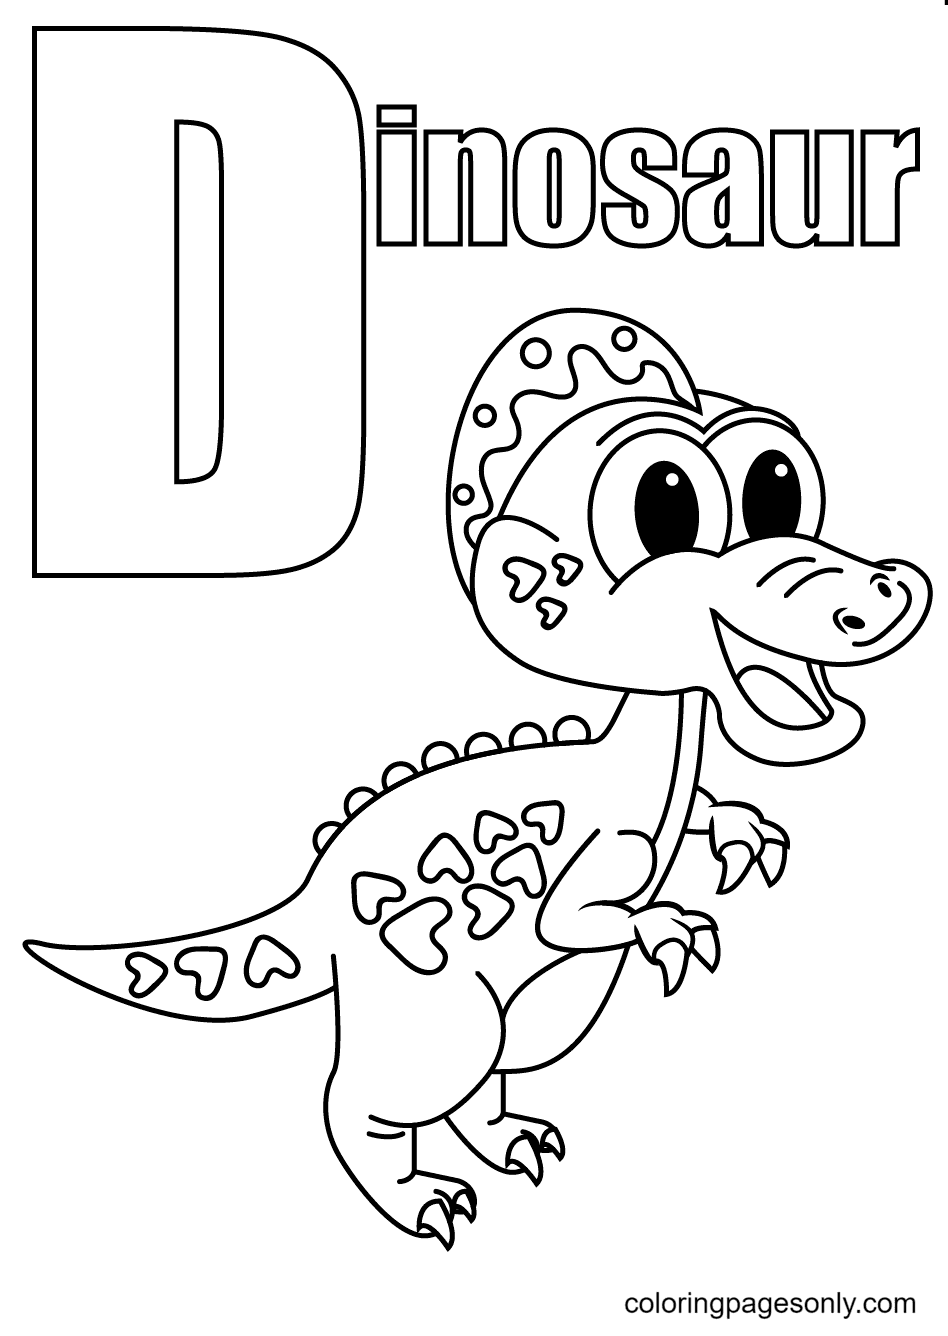 A Cute and Happy Dinosaur for the Letter D Coloring Pages